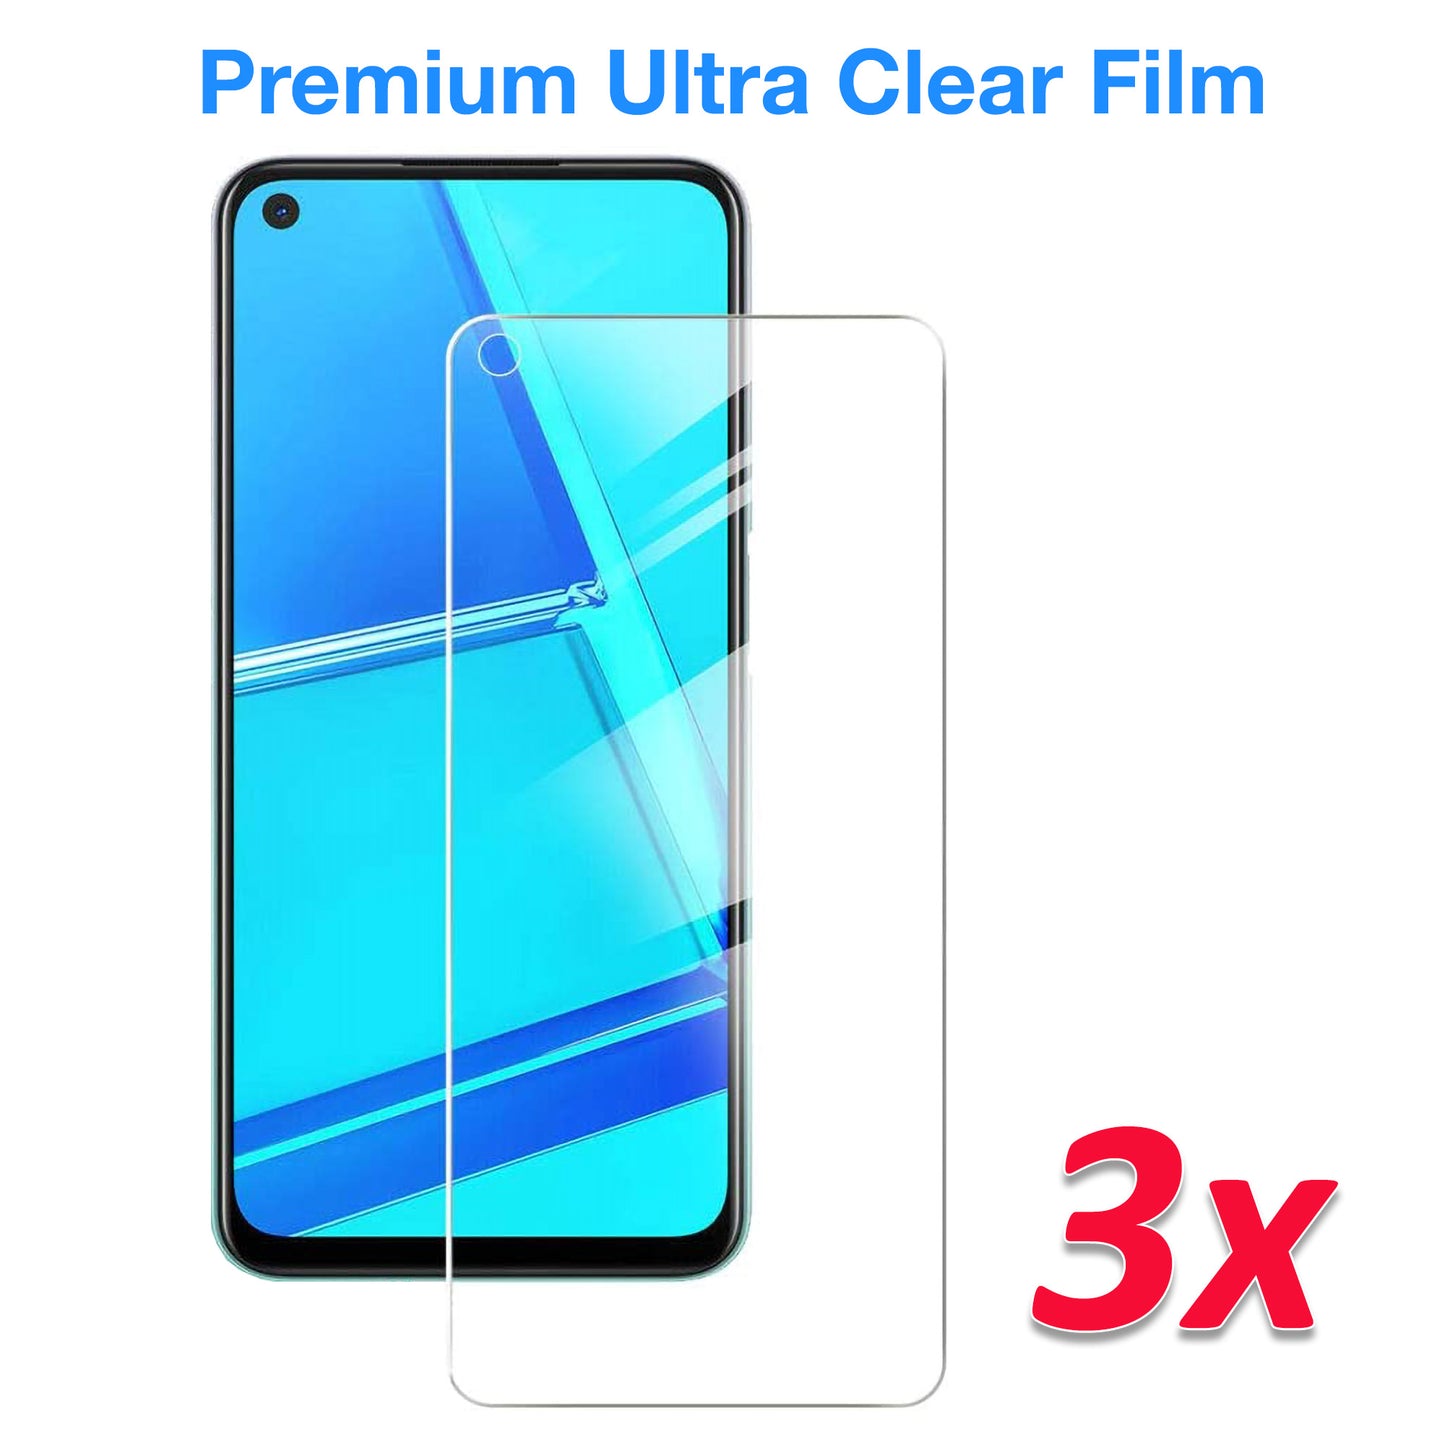 [3 Pack] MEZON Realme 6 Ultra Clear Screen Protector Case Friendly Film (Realme 6, Clear)